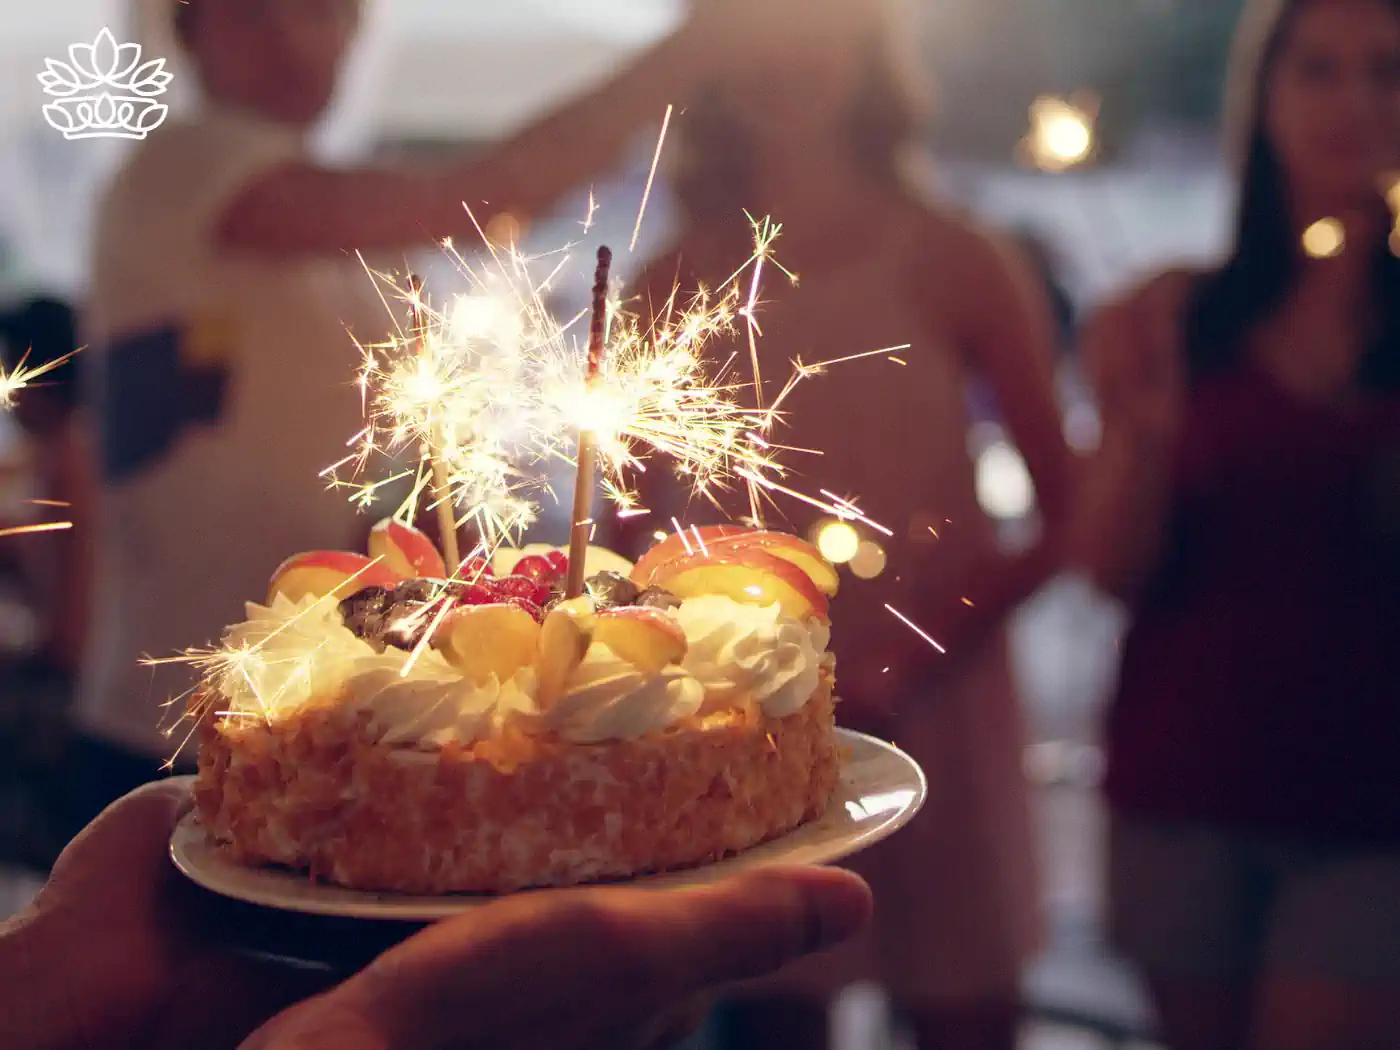 A birthday cake with sparklers being held at a party with people in the background. Fabulous Flowers and Gifts. Taurus Flowers & Gifts Collection.